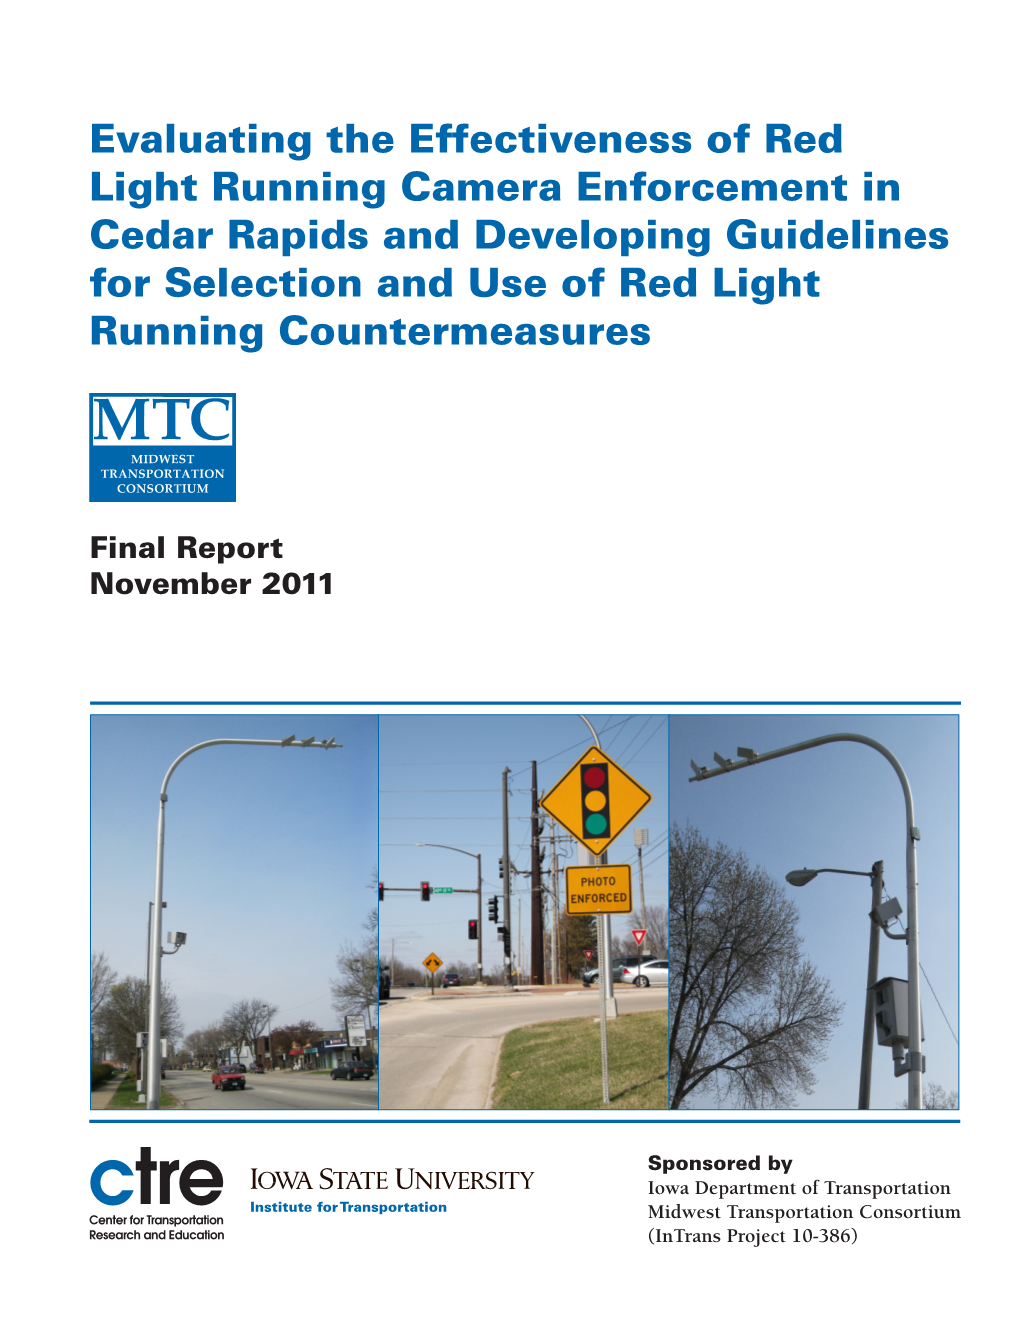 Evaluating the Effectiveness of Red Light Running Camera Enforcement in Cedar Rapids and Developing Guidelines for Selection